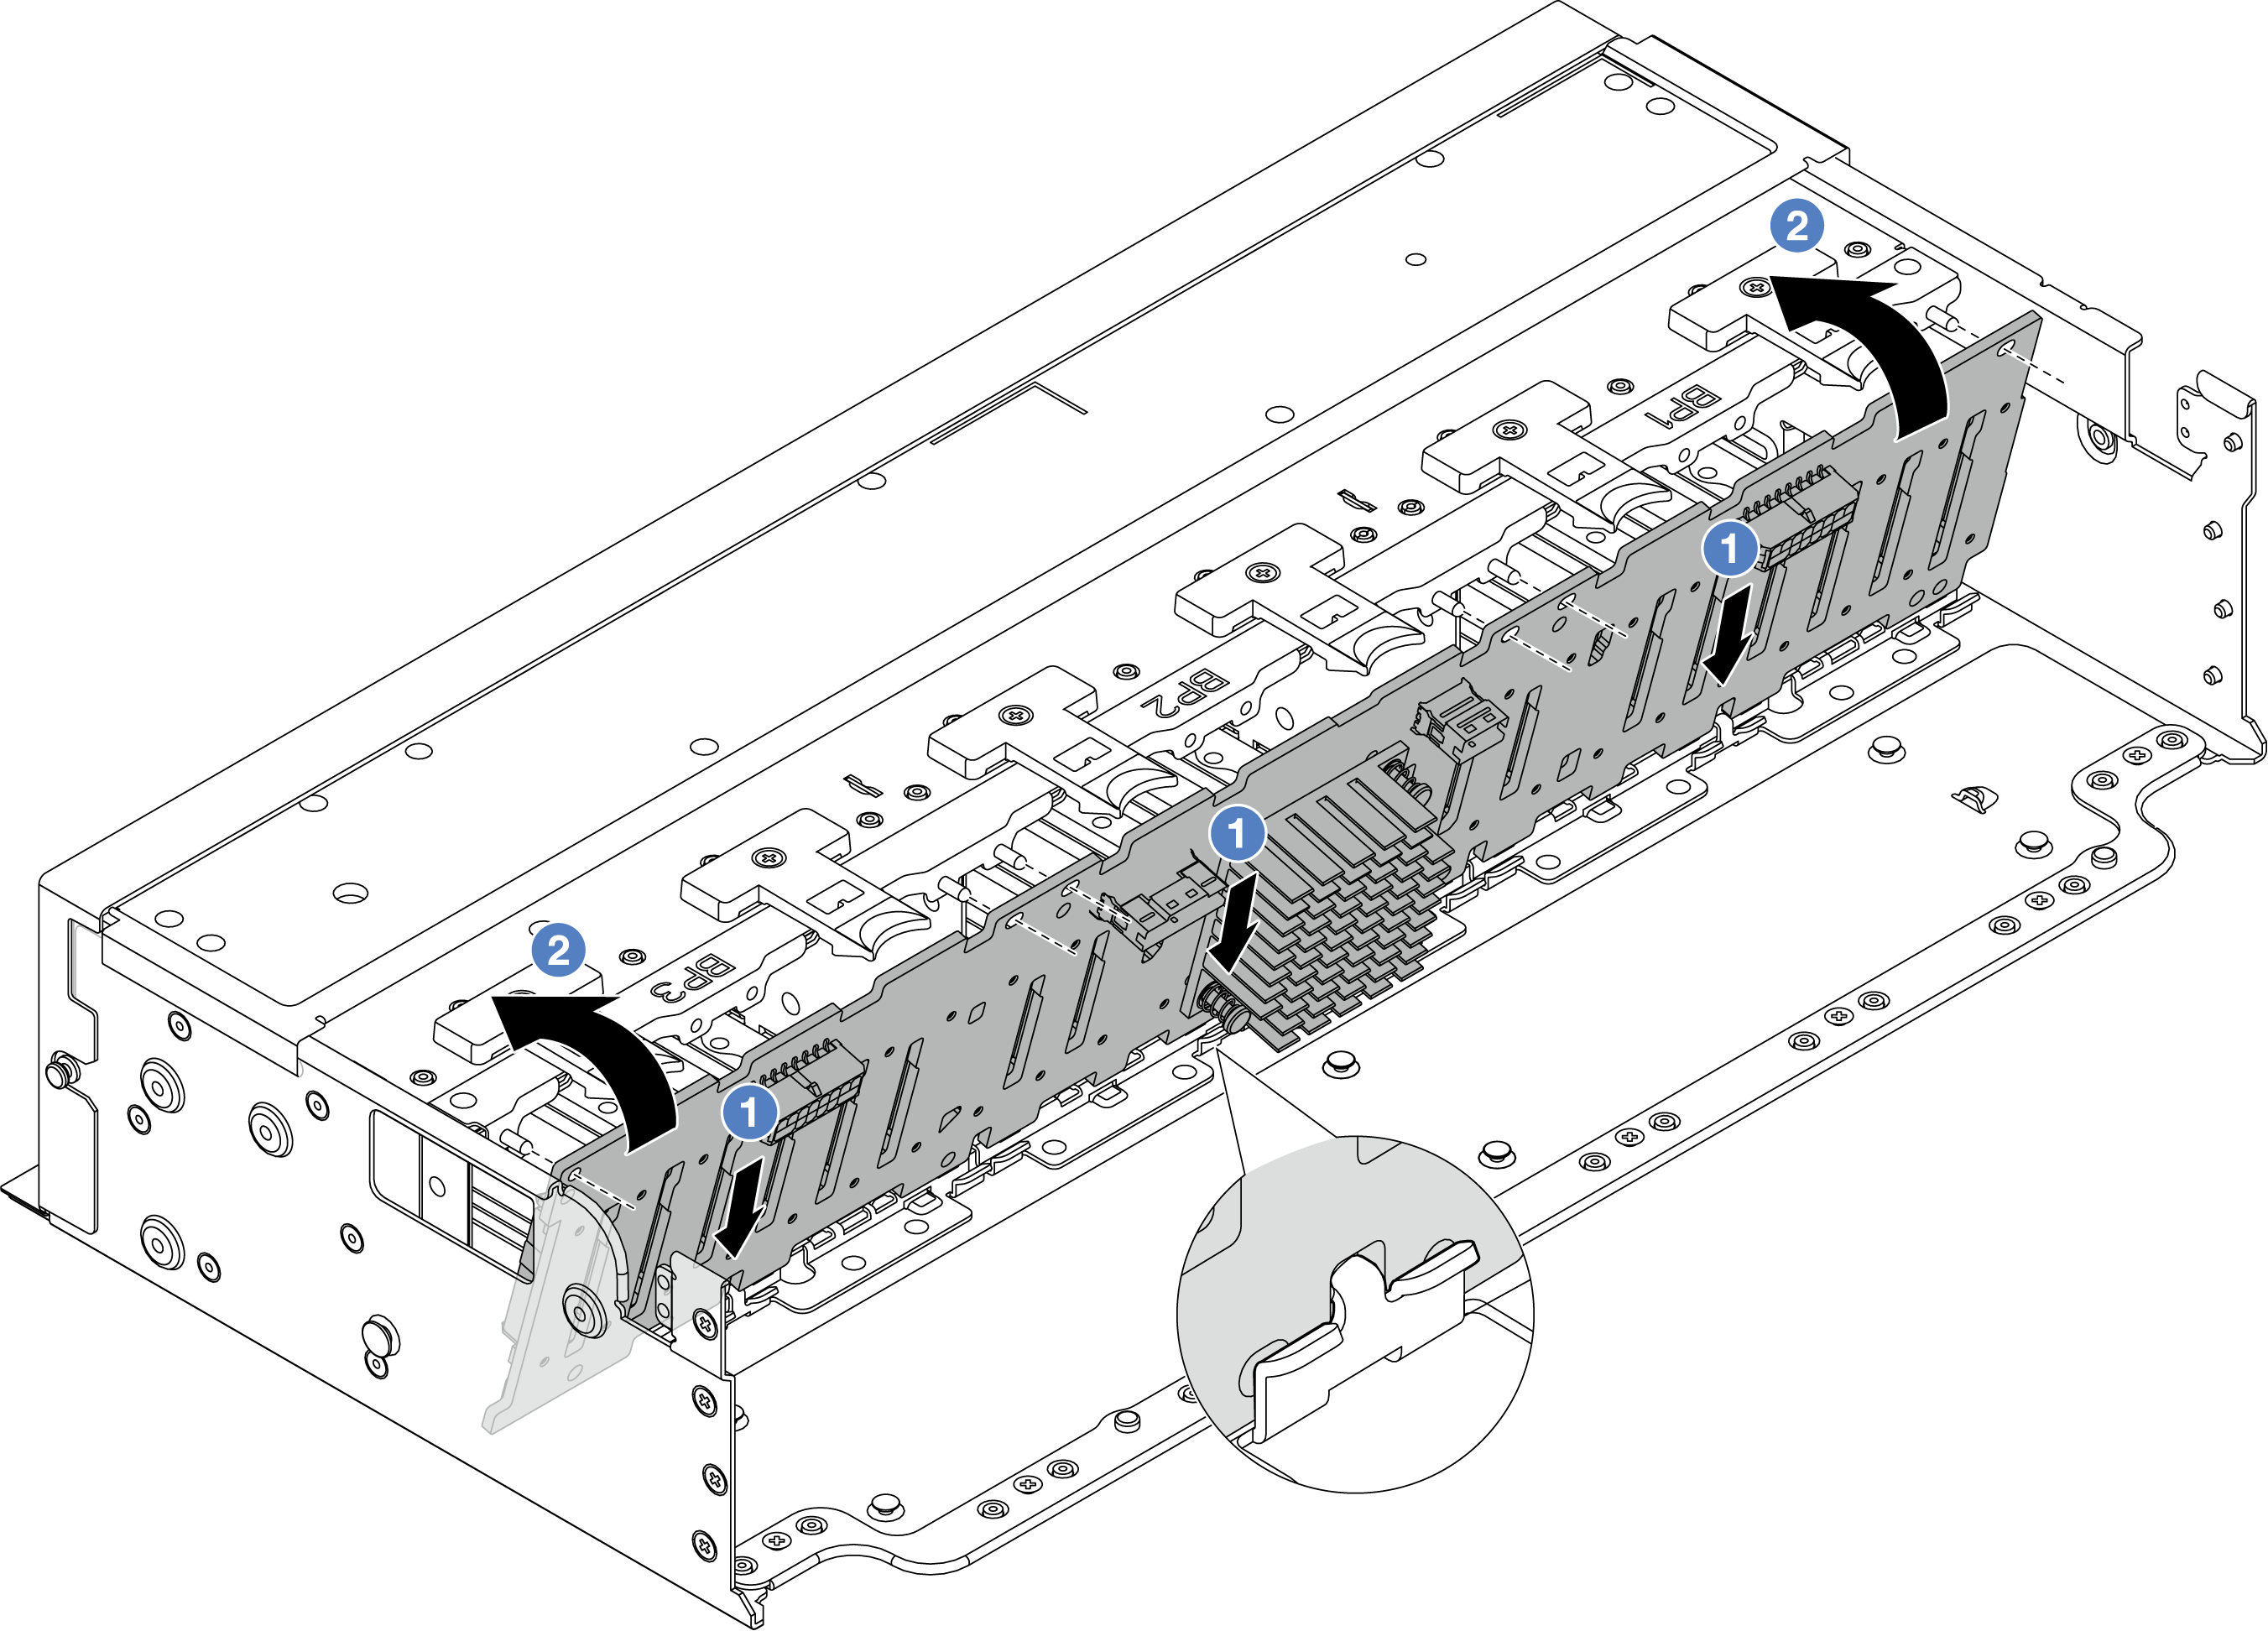 Installing the 24-bay drive backplane with expander